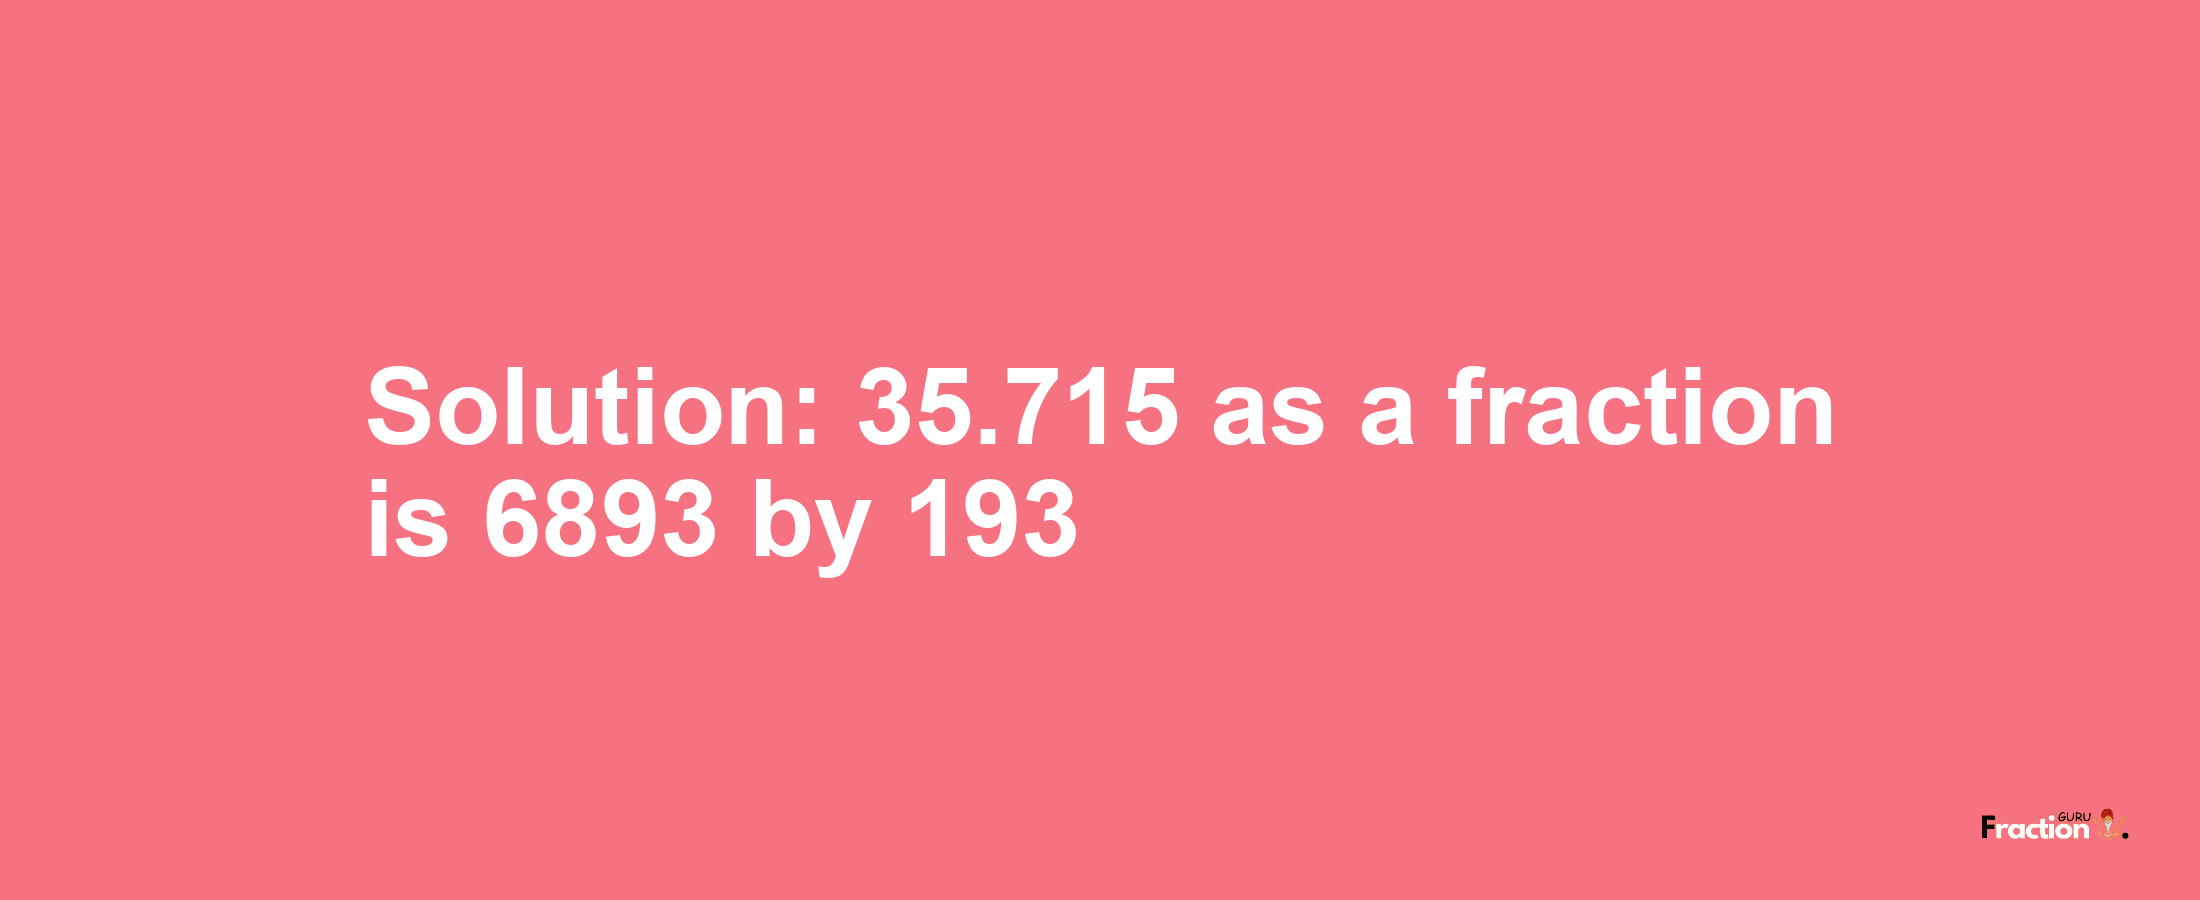 Solution:35.715 as a fraction is 6893/193